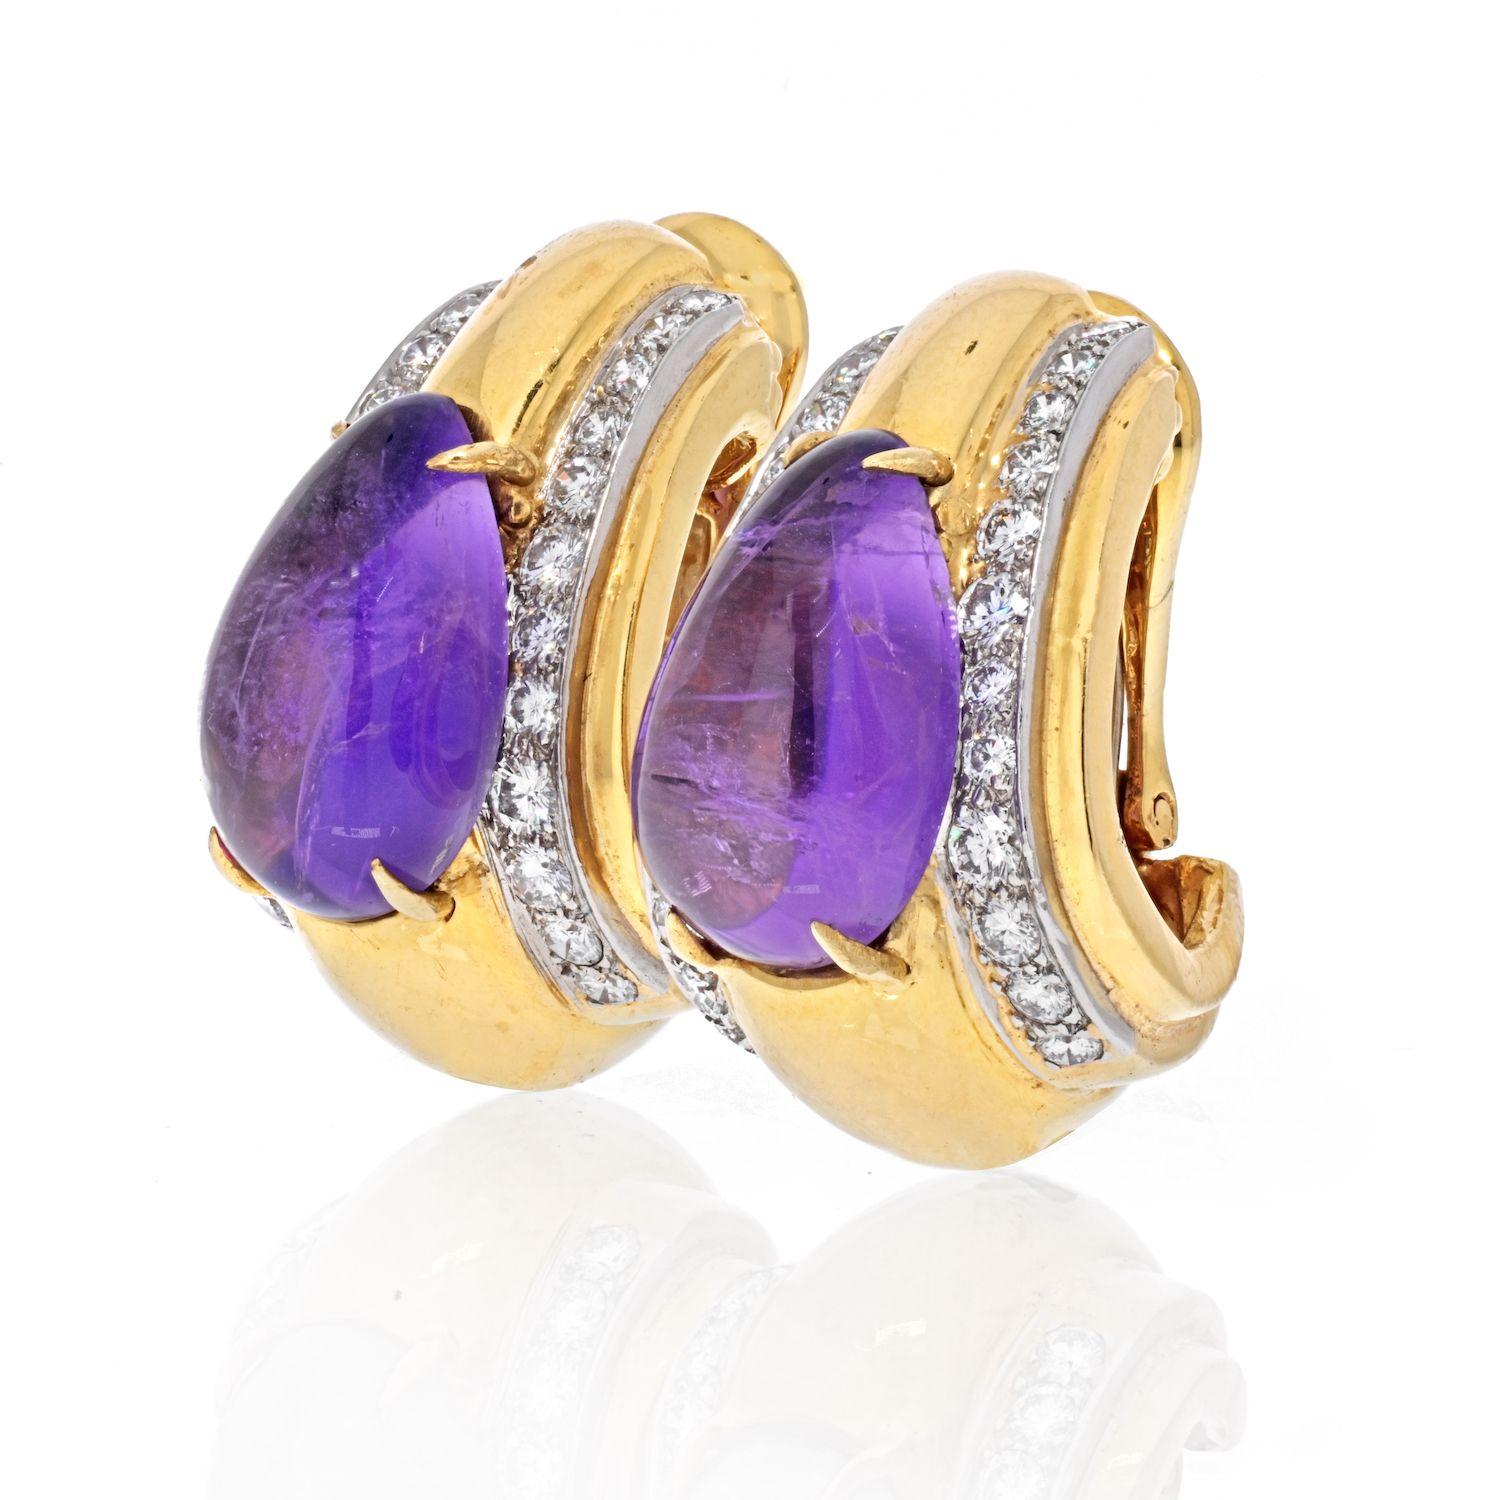 Bold yet classy earrings created by David Webb in the 1970's. Feature Amethyst teardrop cabochon set in yellow gold with diamond accents on the sides. The diamonds are set in platinum which supports the whiteness of the diamonds. Beautiful color